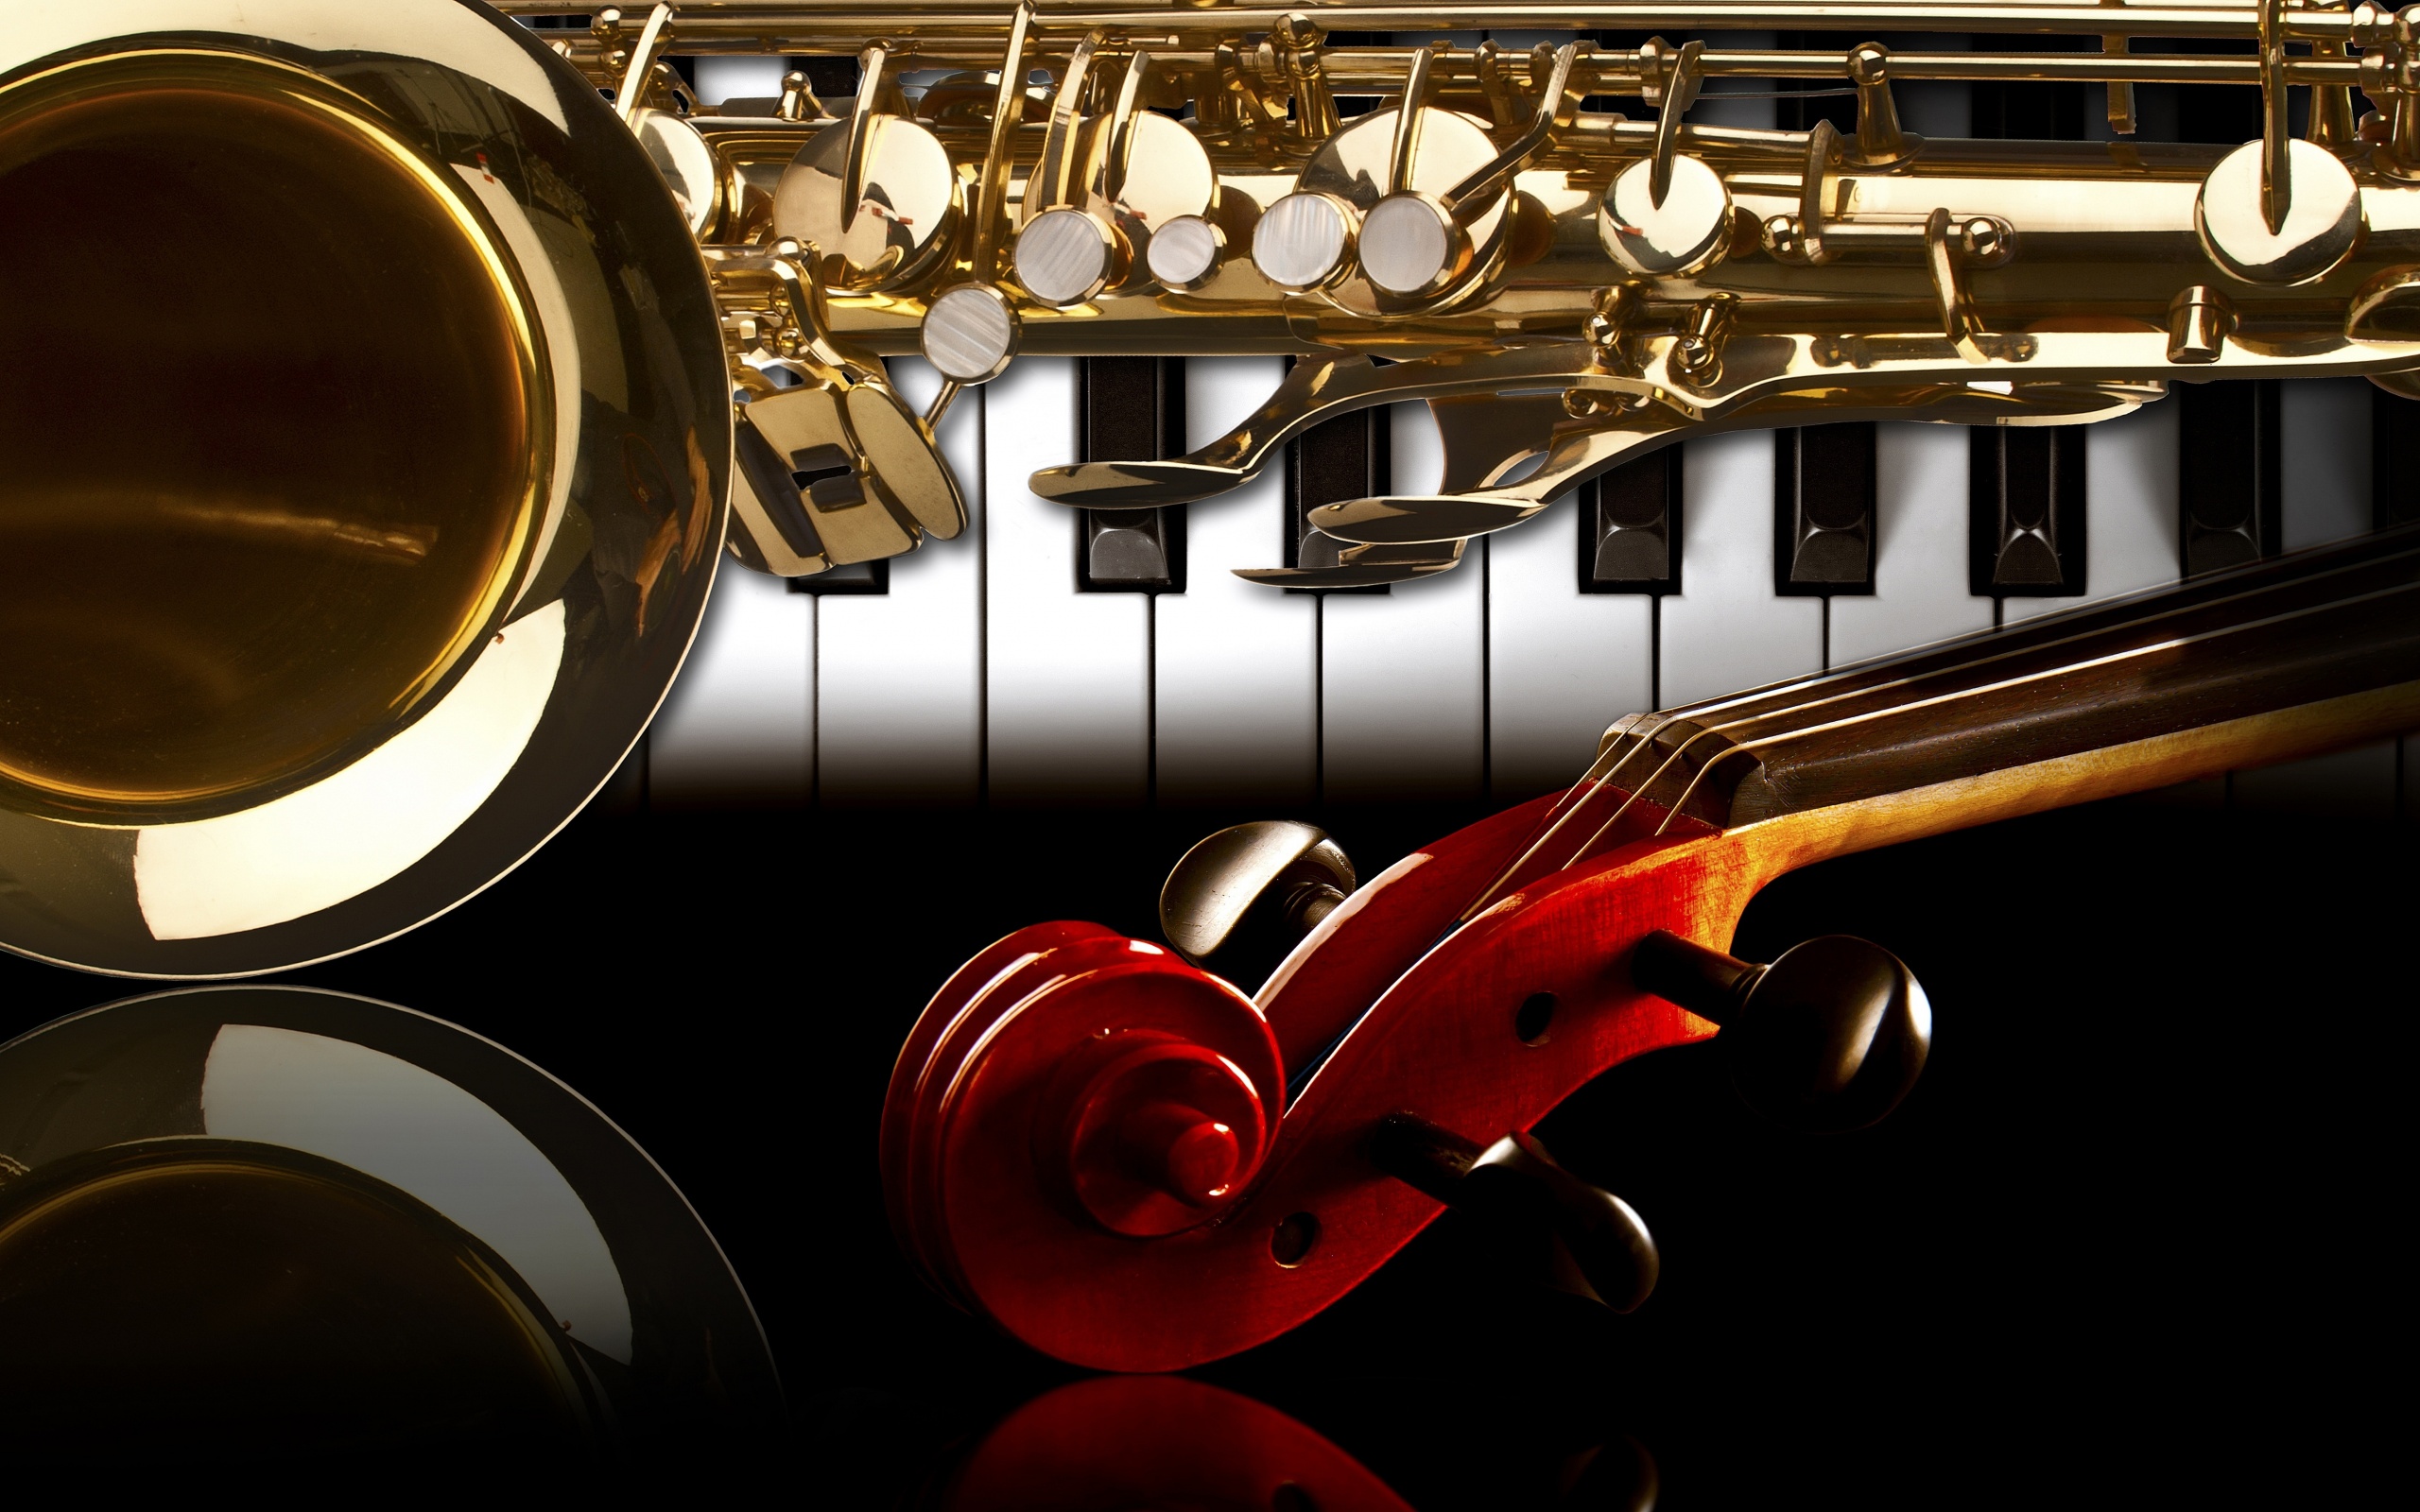 Wallpapers Instruments Music images